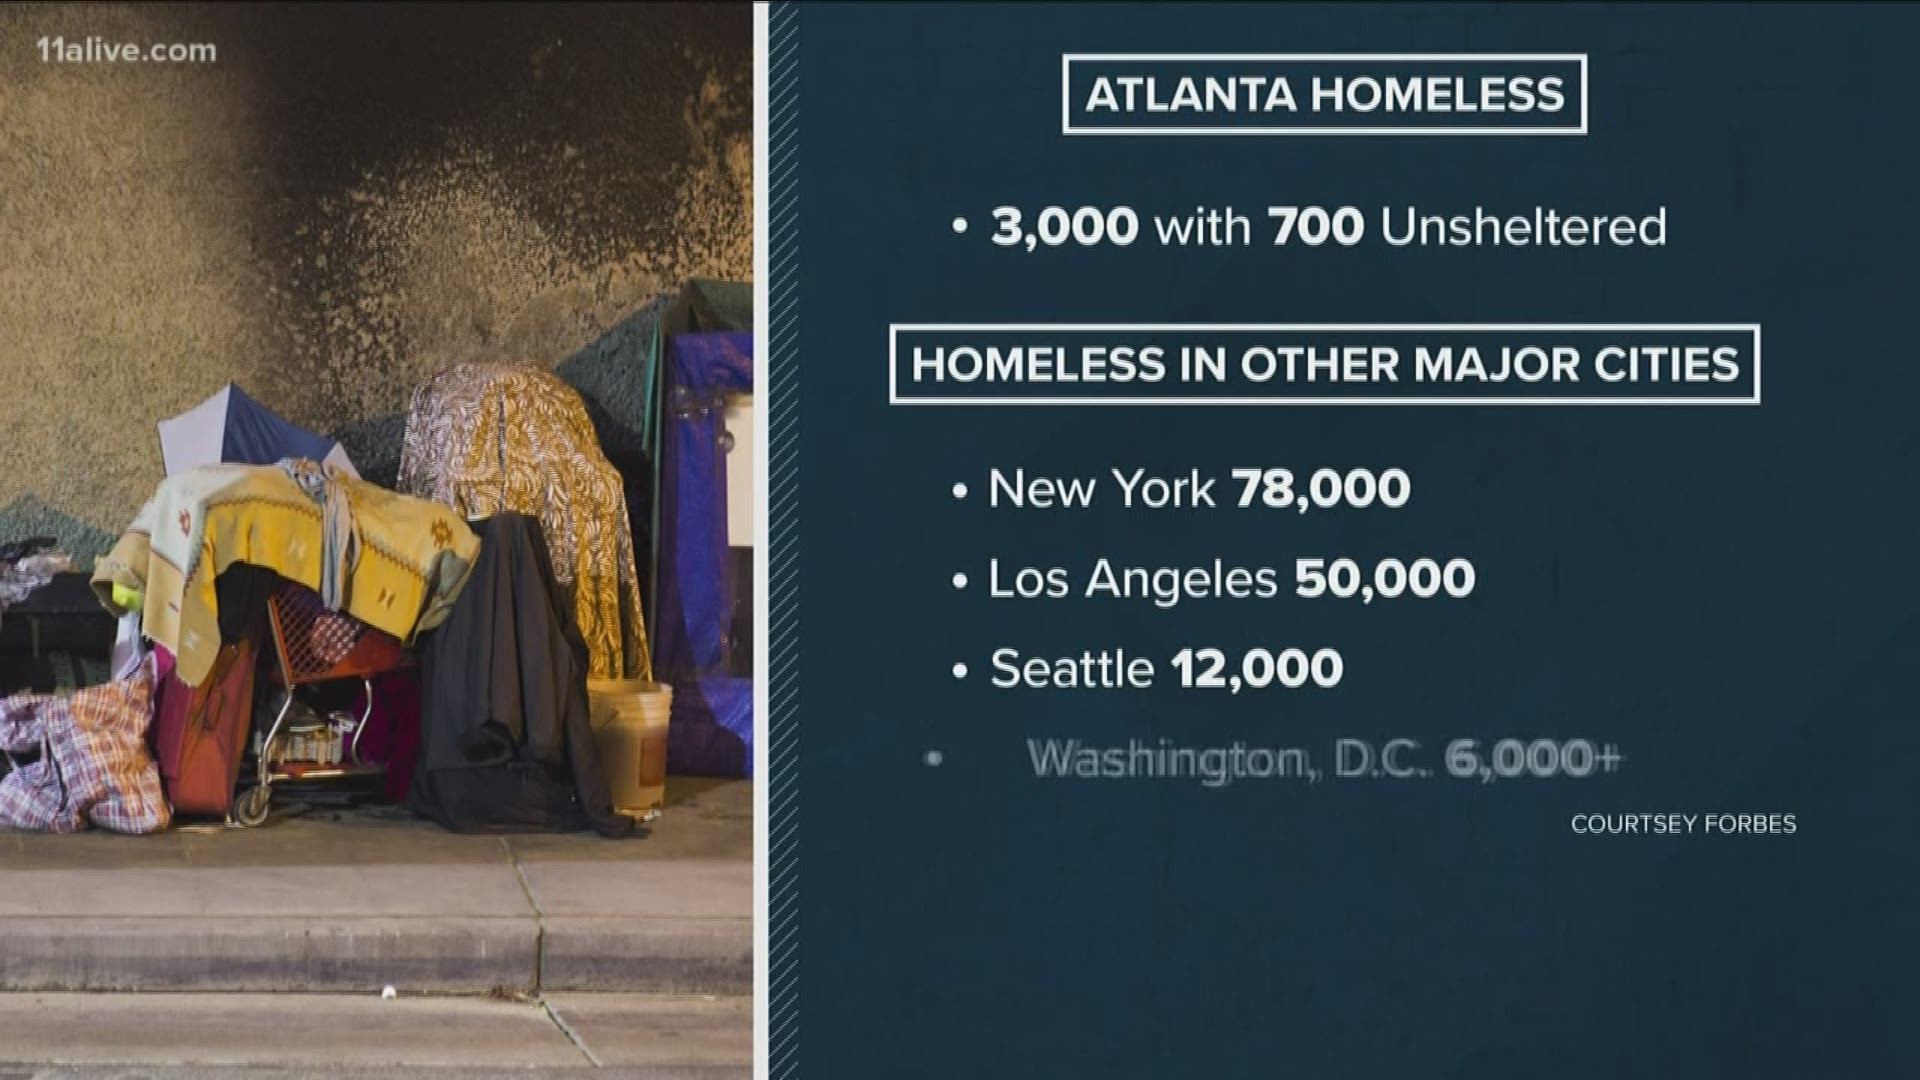 In this exclusive report, details on the City of Atlanta and the private sector joining to clear Atlanta streets of the homeless and provide care and housing.